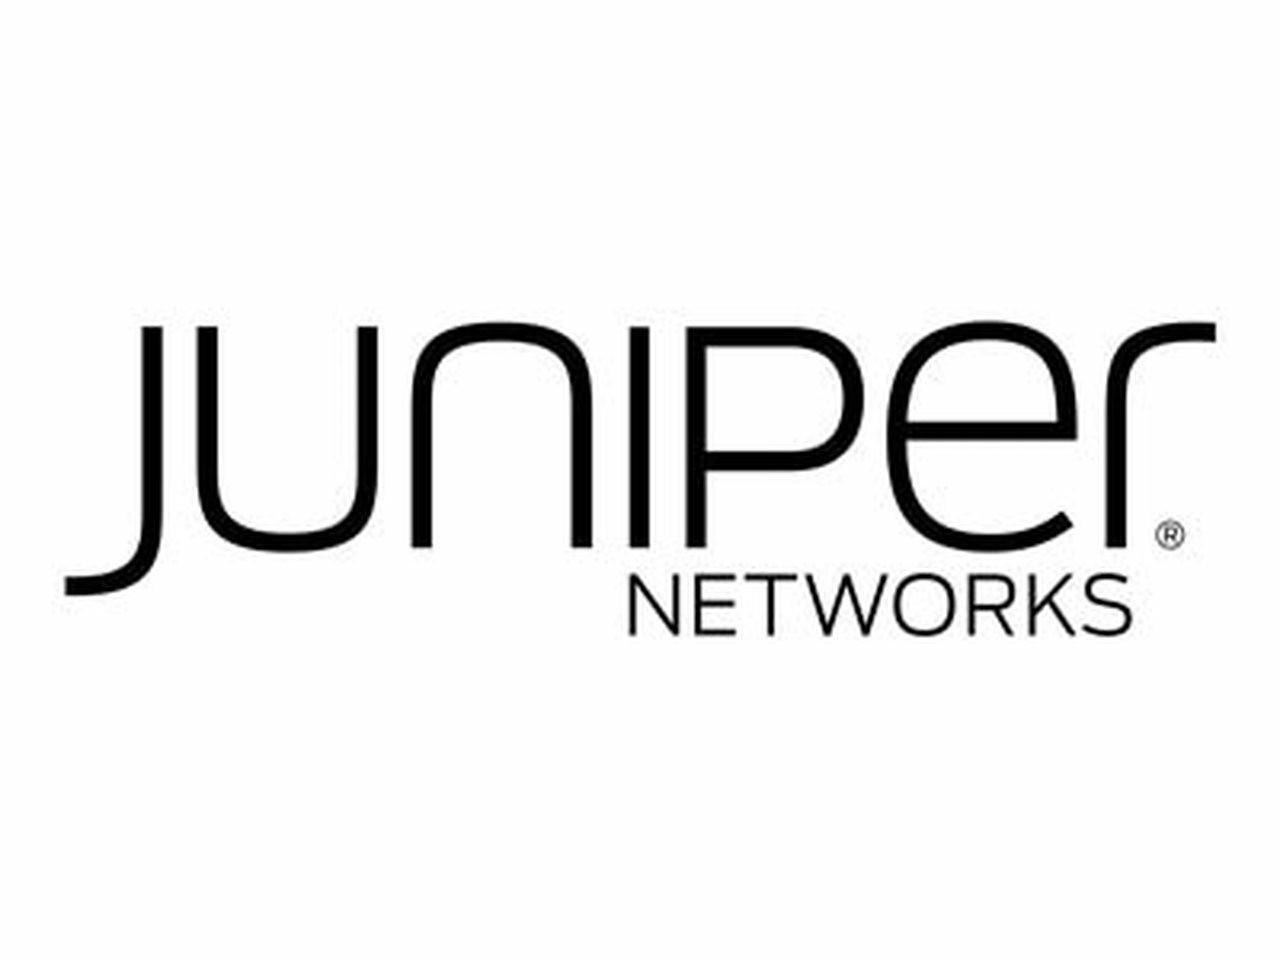 Juniper Care 3 Years Prepaid Software Advantage Support For Js-Logdirector-1K